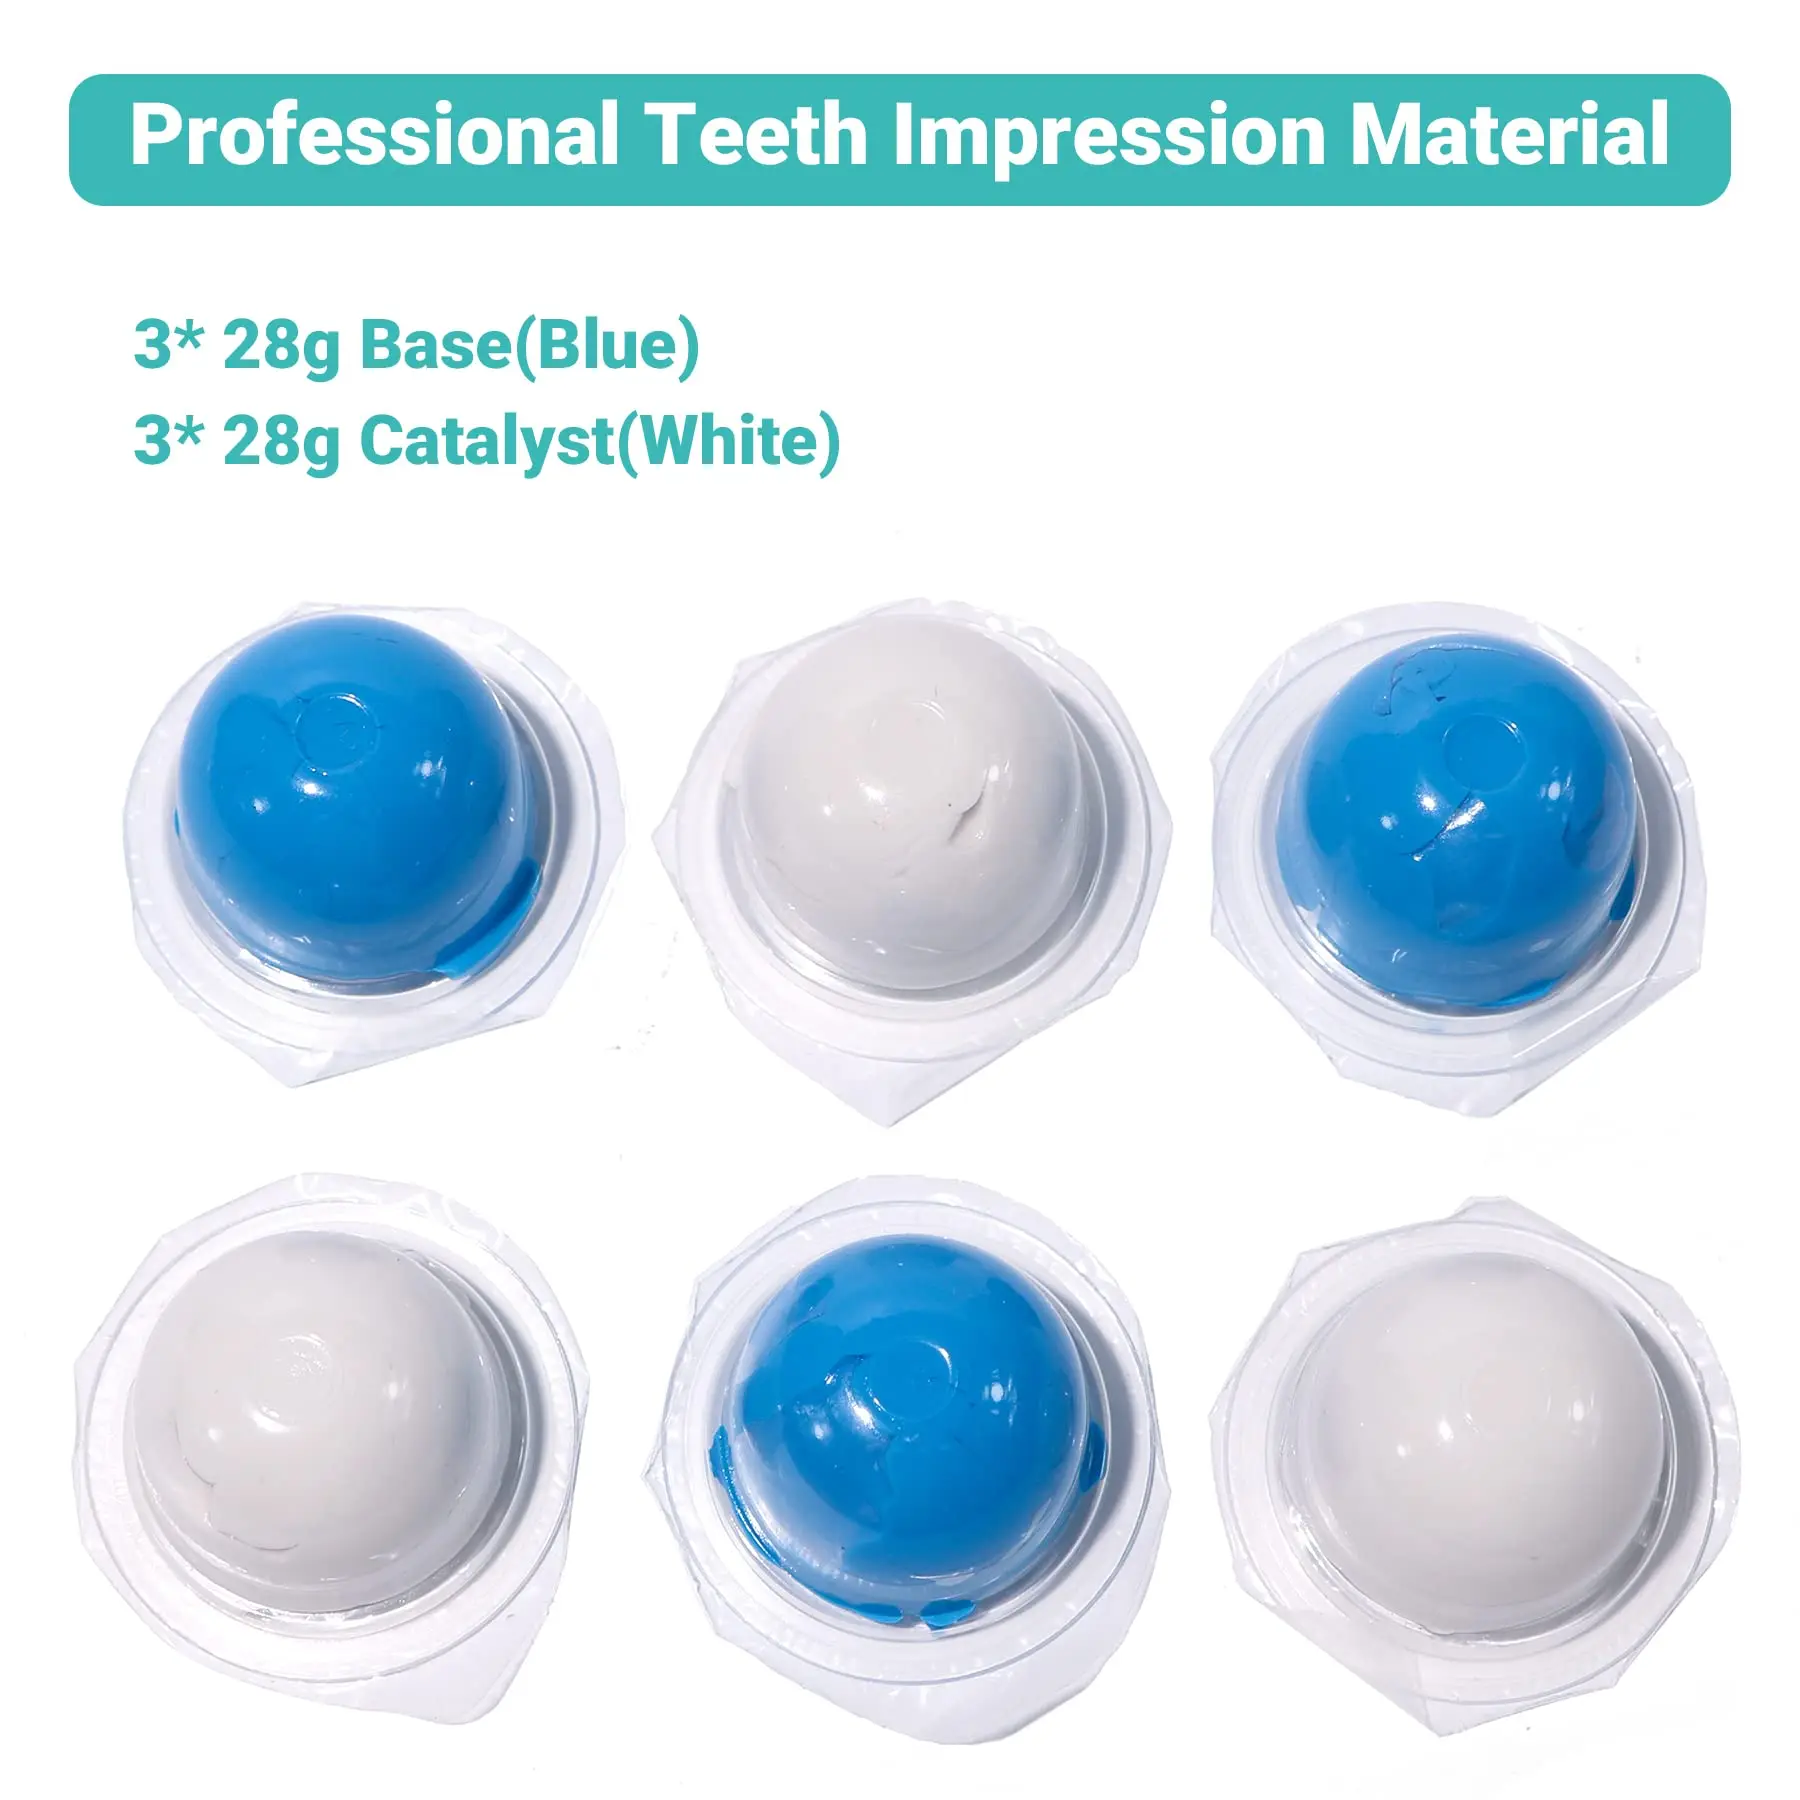 Dental Impression Kit -168 Gm Putty Silicone Material- 2 Trays-Upper &  Lower- DIY Teeth Molding Kit - for Home or Clinic Use - AliExpress